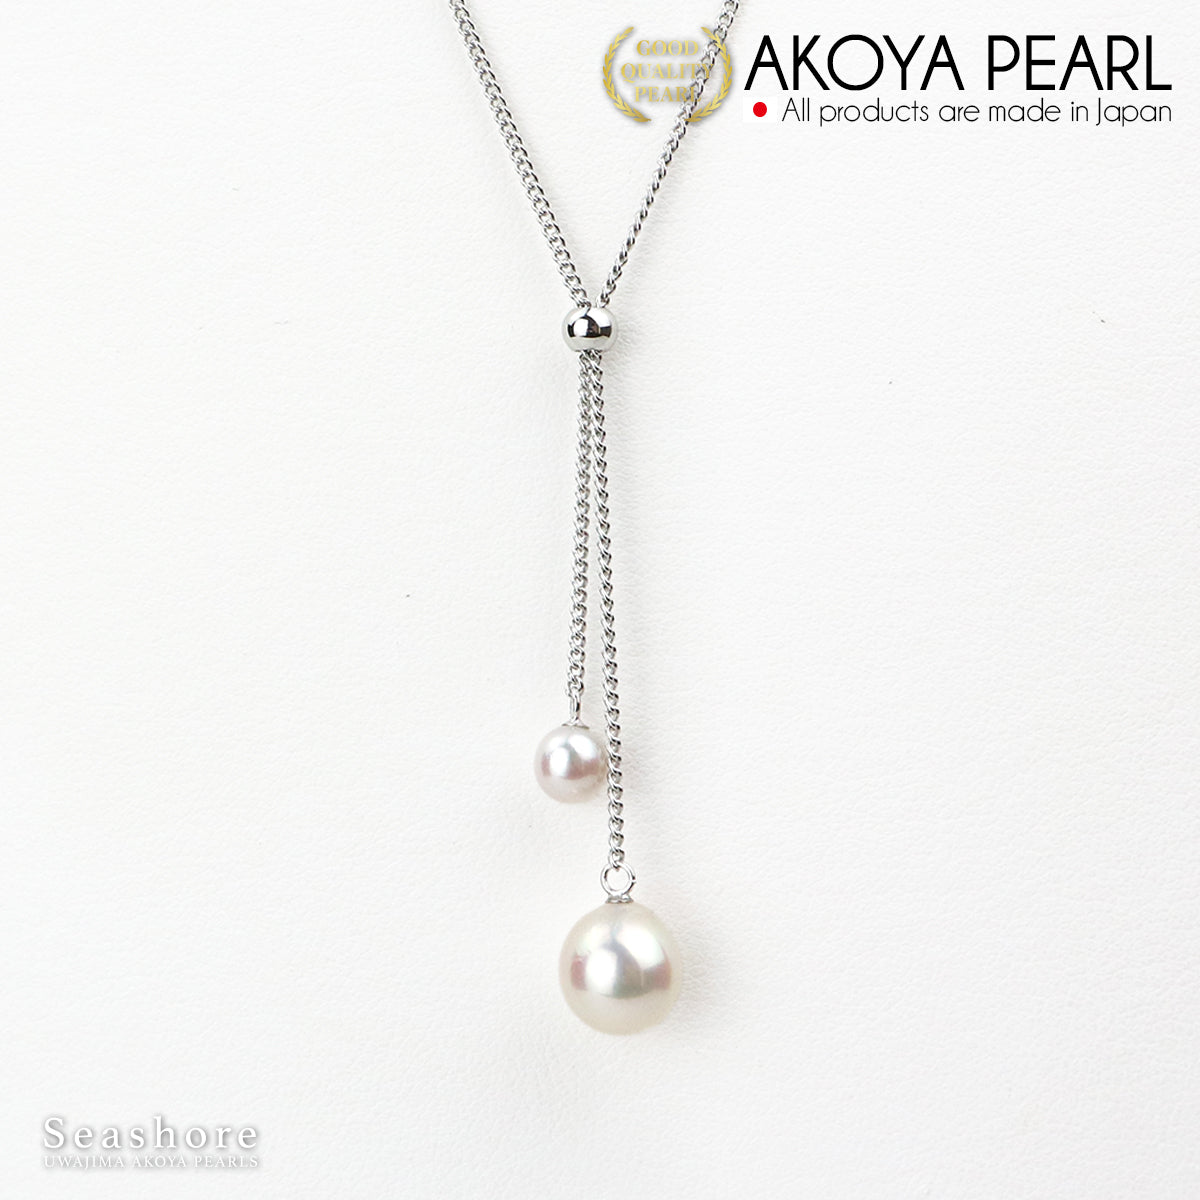 2 Akoya Pearls Long Chain Necklace [5.0-9.0mm] Brass Silver/Gold [2 Colors Available] Pearl Necklace